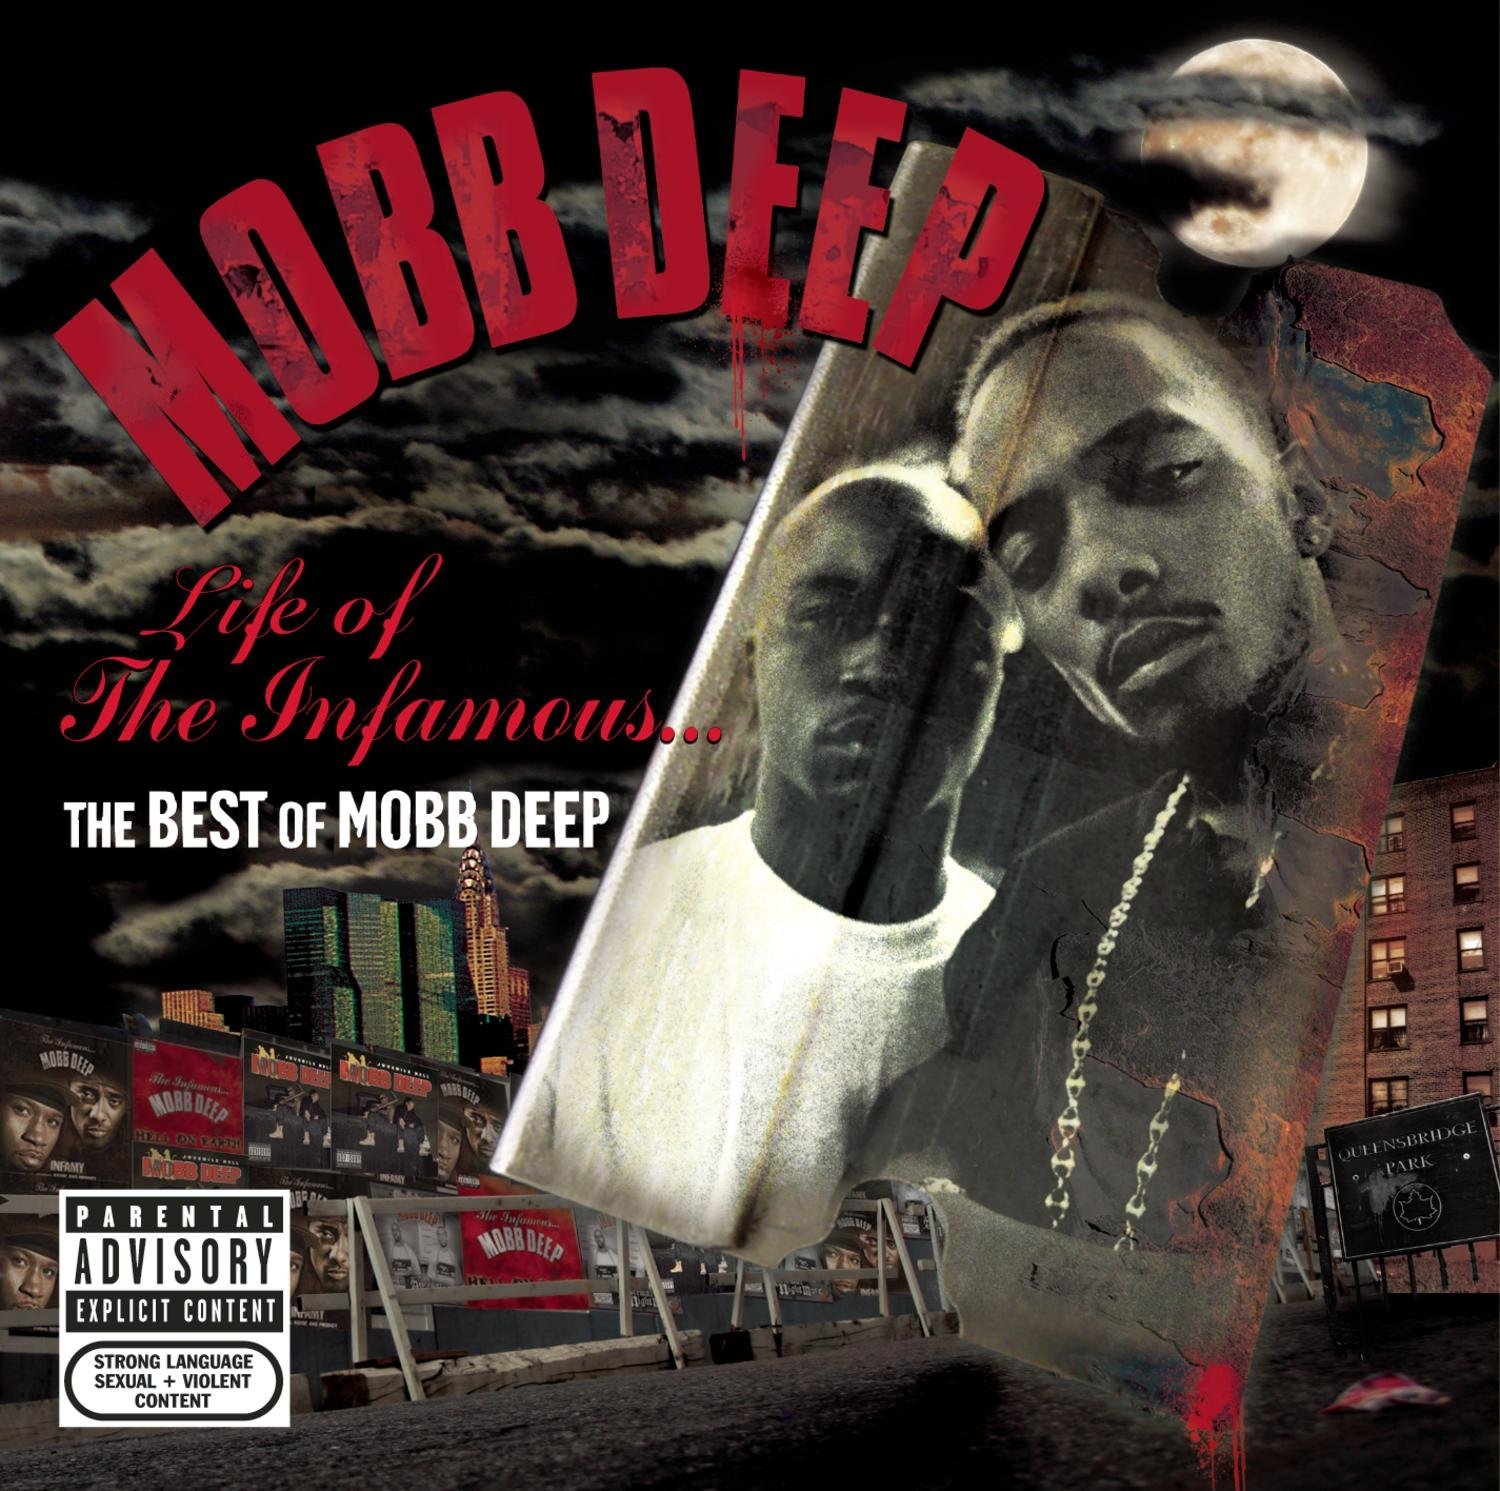 Life Of The Infamous - The Best Of Mobb Deep | Mobb Deep image